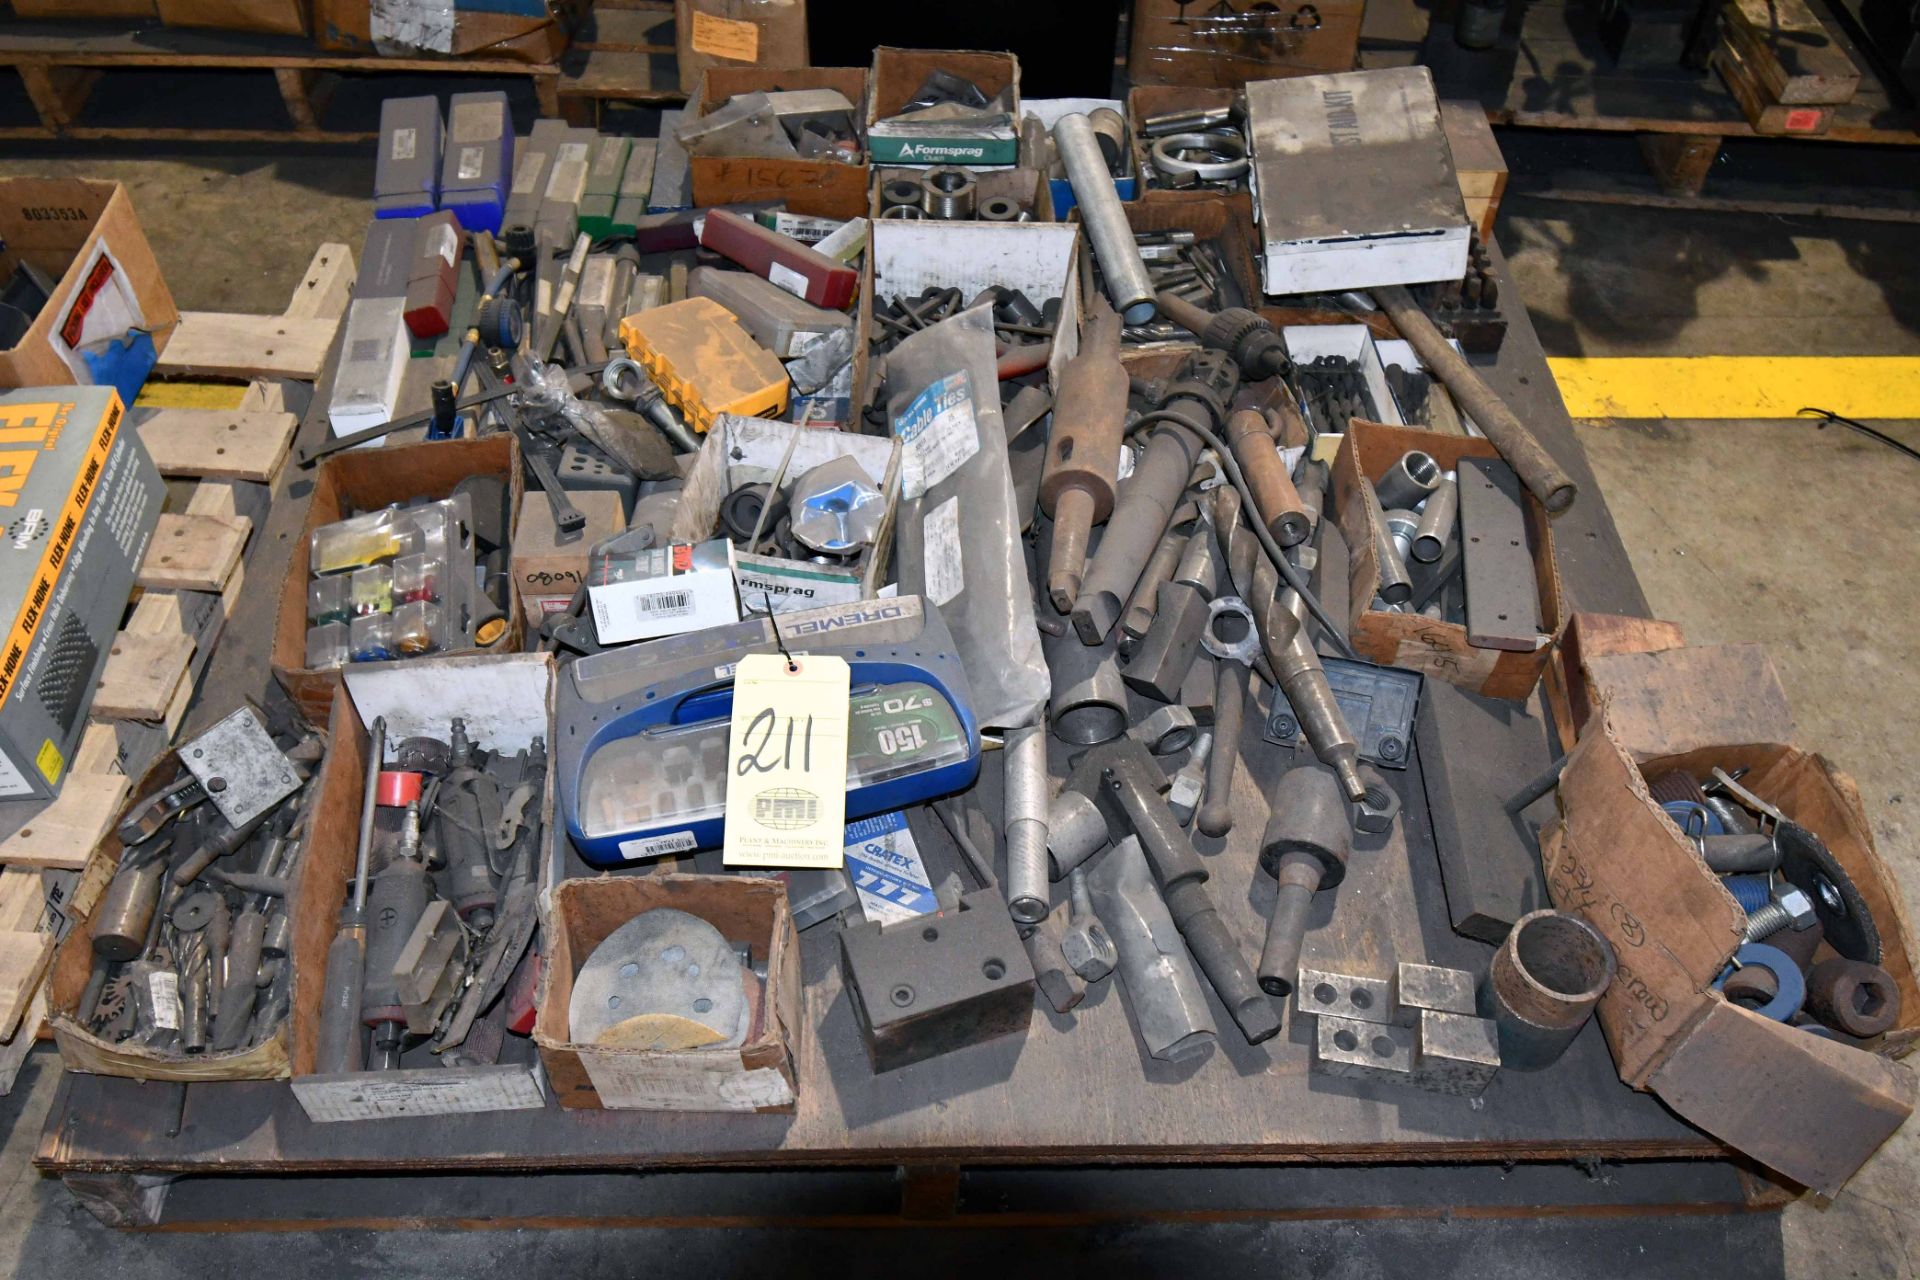 LOT OF CONSISTING OF: misc. shop tools & equipment (on one pallet)